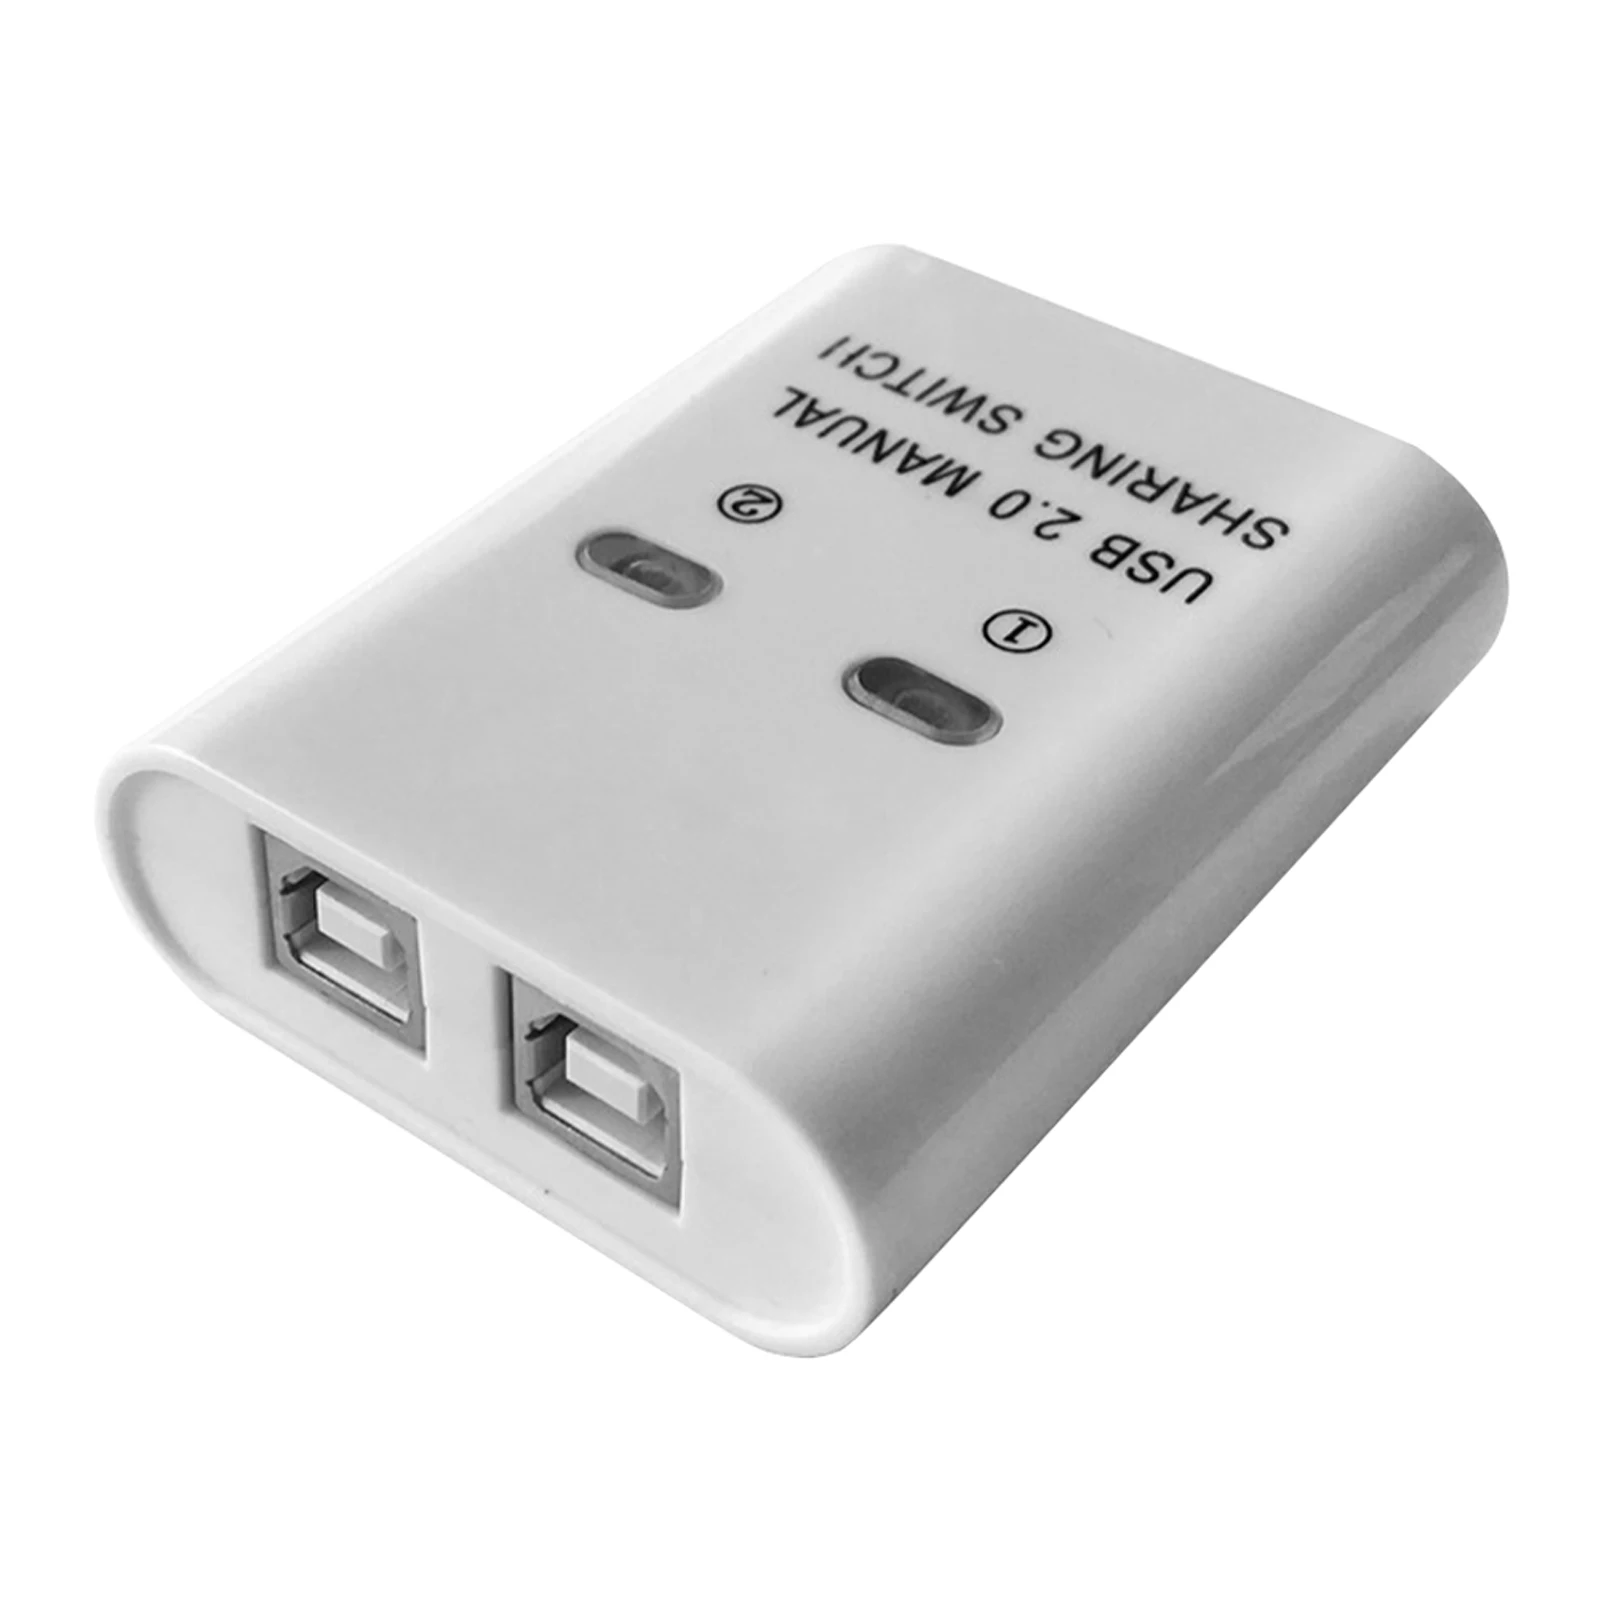 

Plug And Play Stable Transmission Portable Electronic Button Efficient 2 Port Home Office Splitter Converter USB Printer Hub